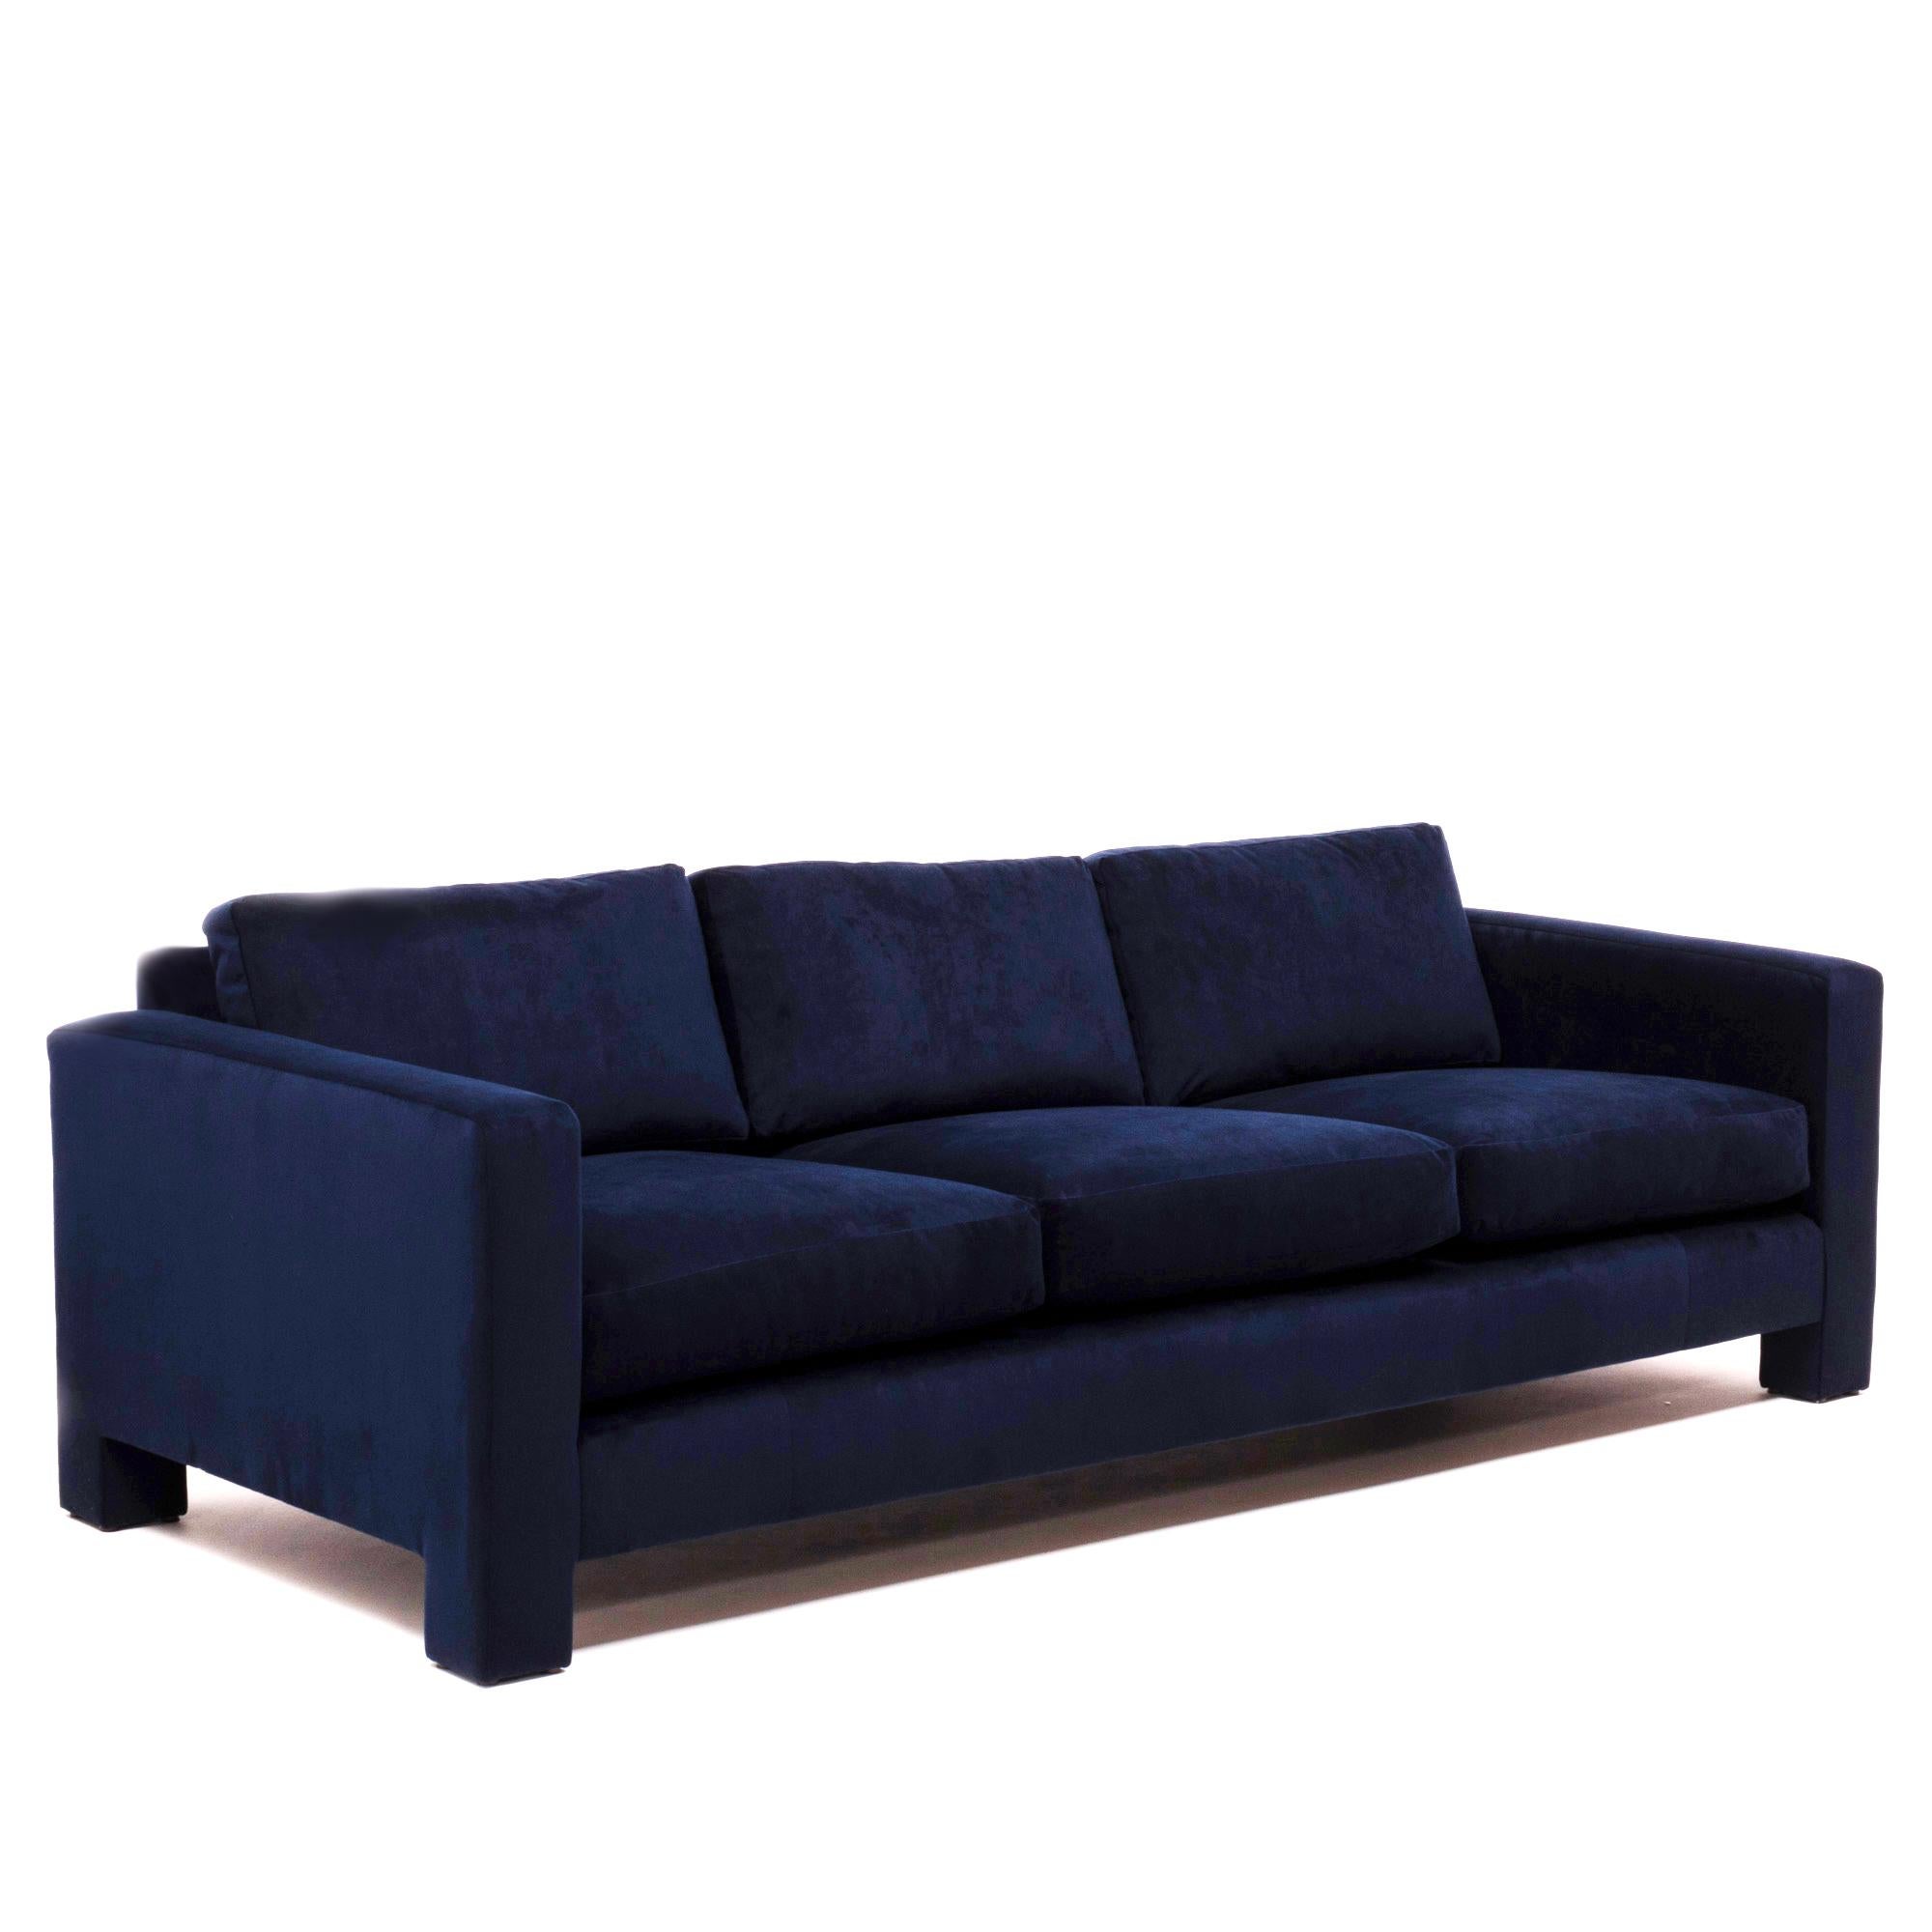 A Classic example of Mid-Century Modern design, this three-seat sofa by Milo Baughman is a timeless piece.

Newly reupholstered in sumptuous navy blue velvet, the sofa has a thick, angular frame and deep, comfortable seating.

The three-seat